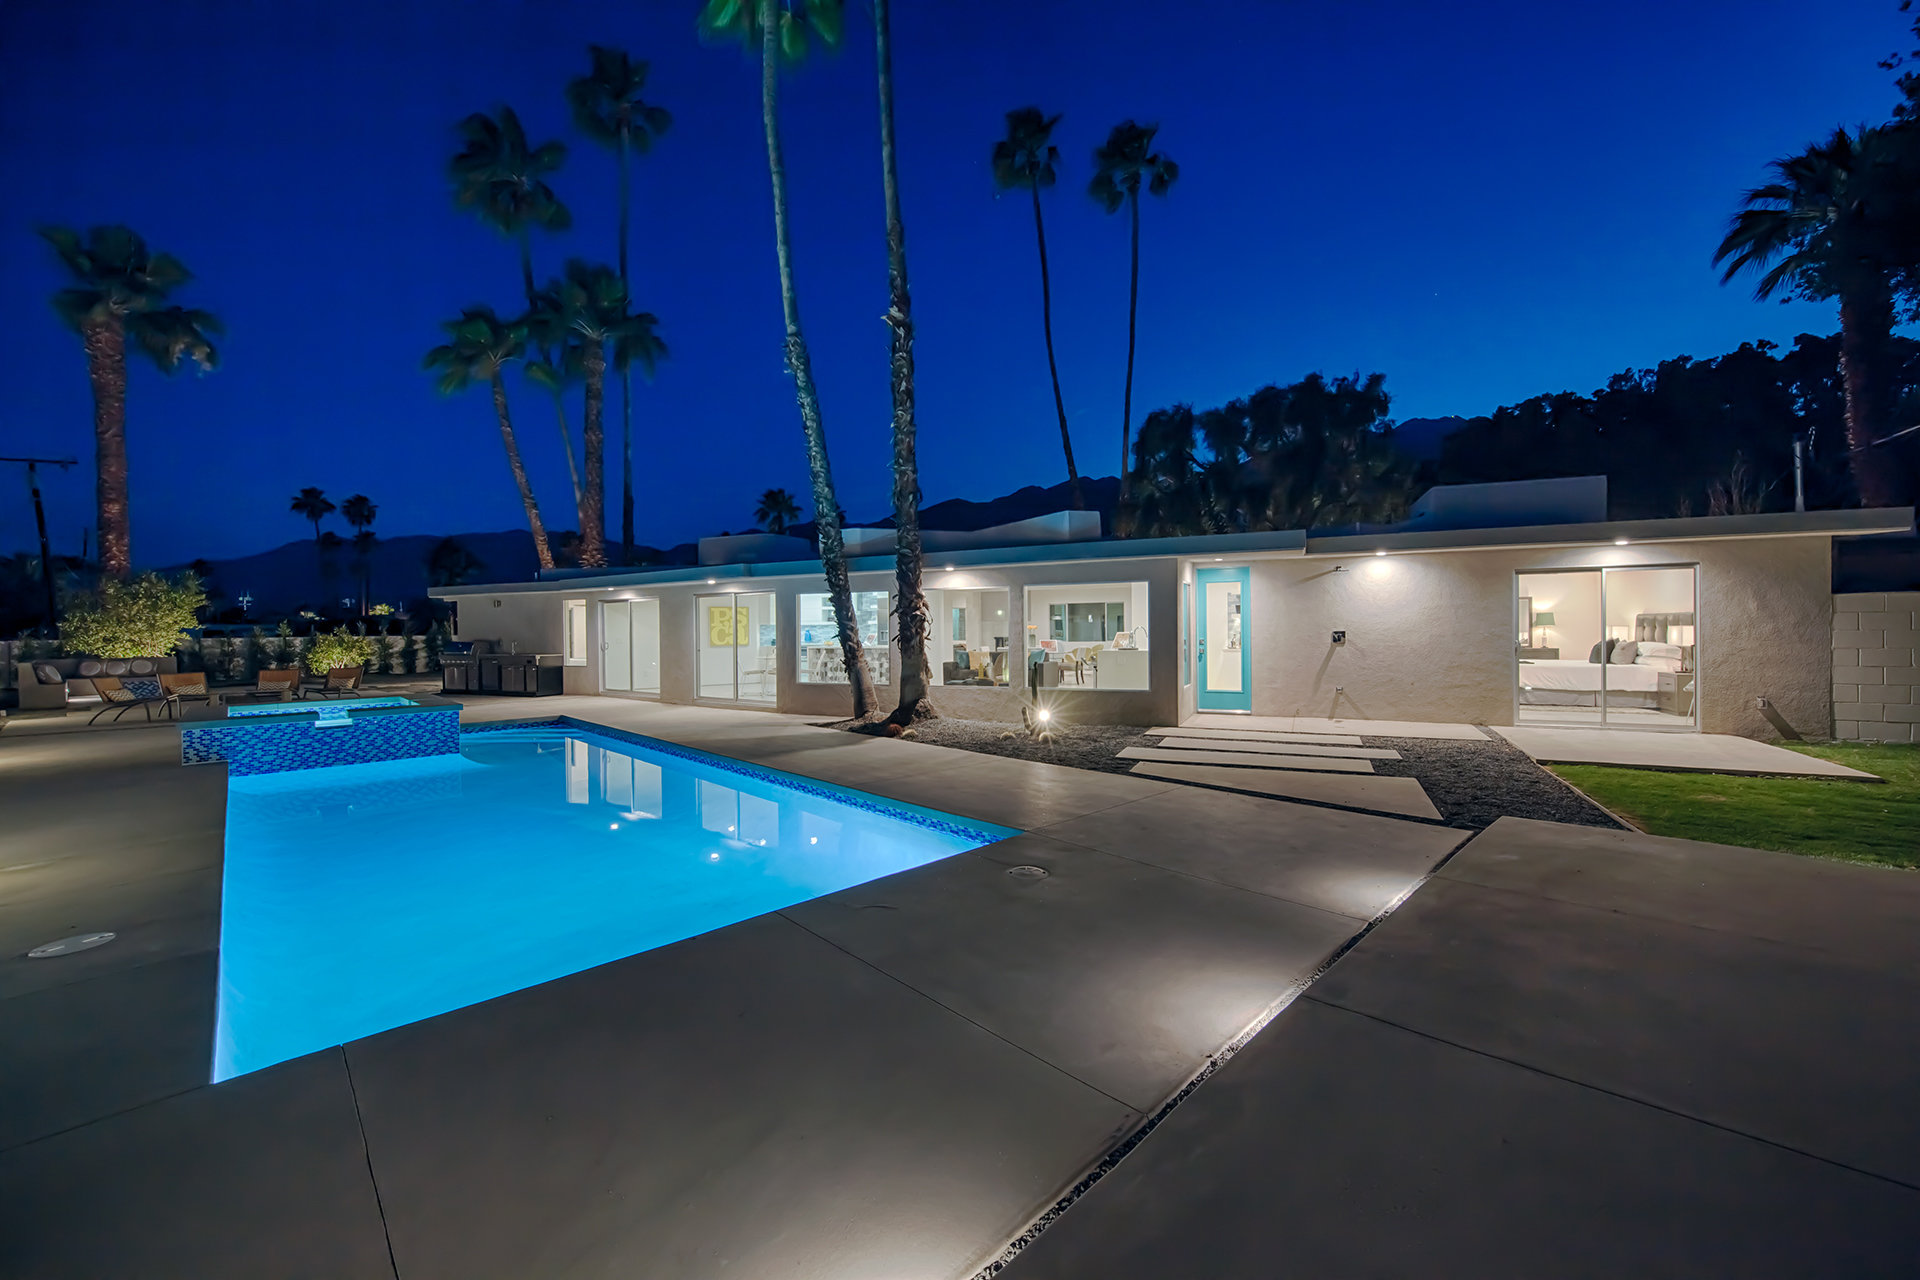 A mid-century home with pool in the Sunrise Park neighborhood of Palm Springs, California